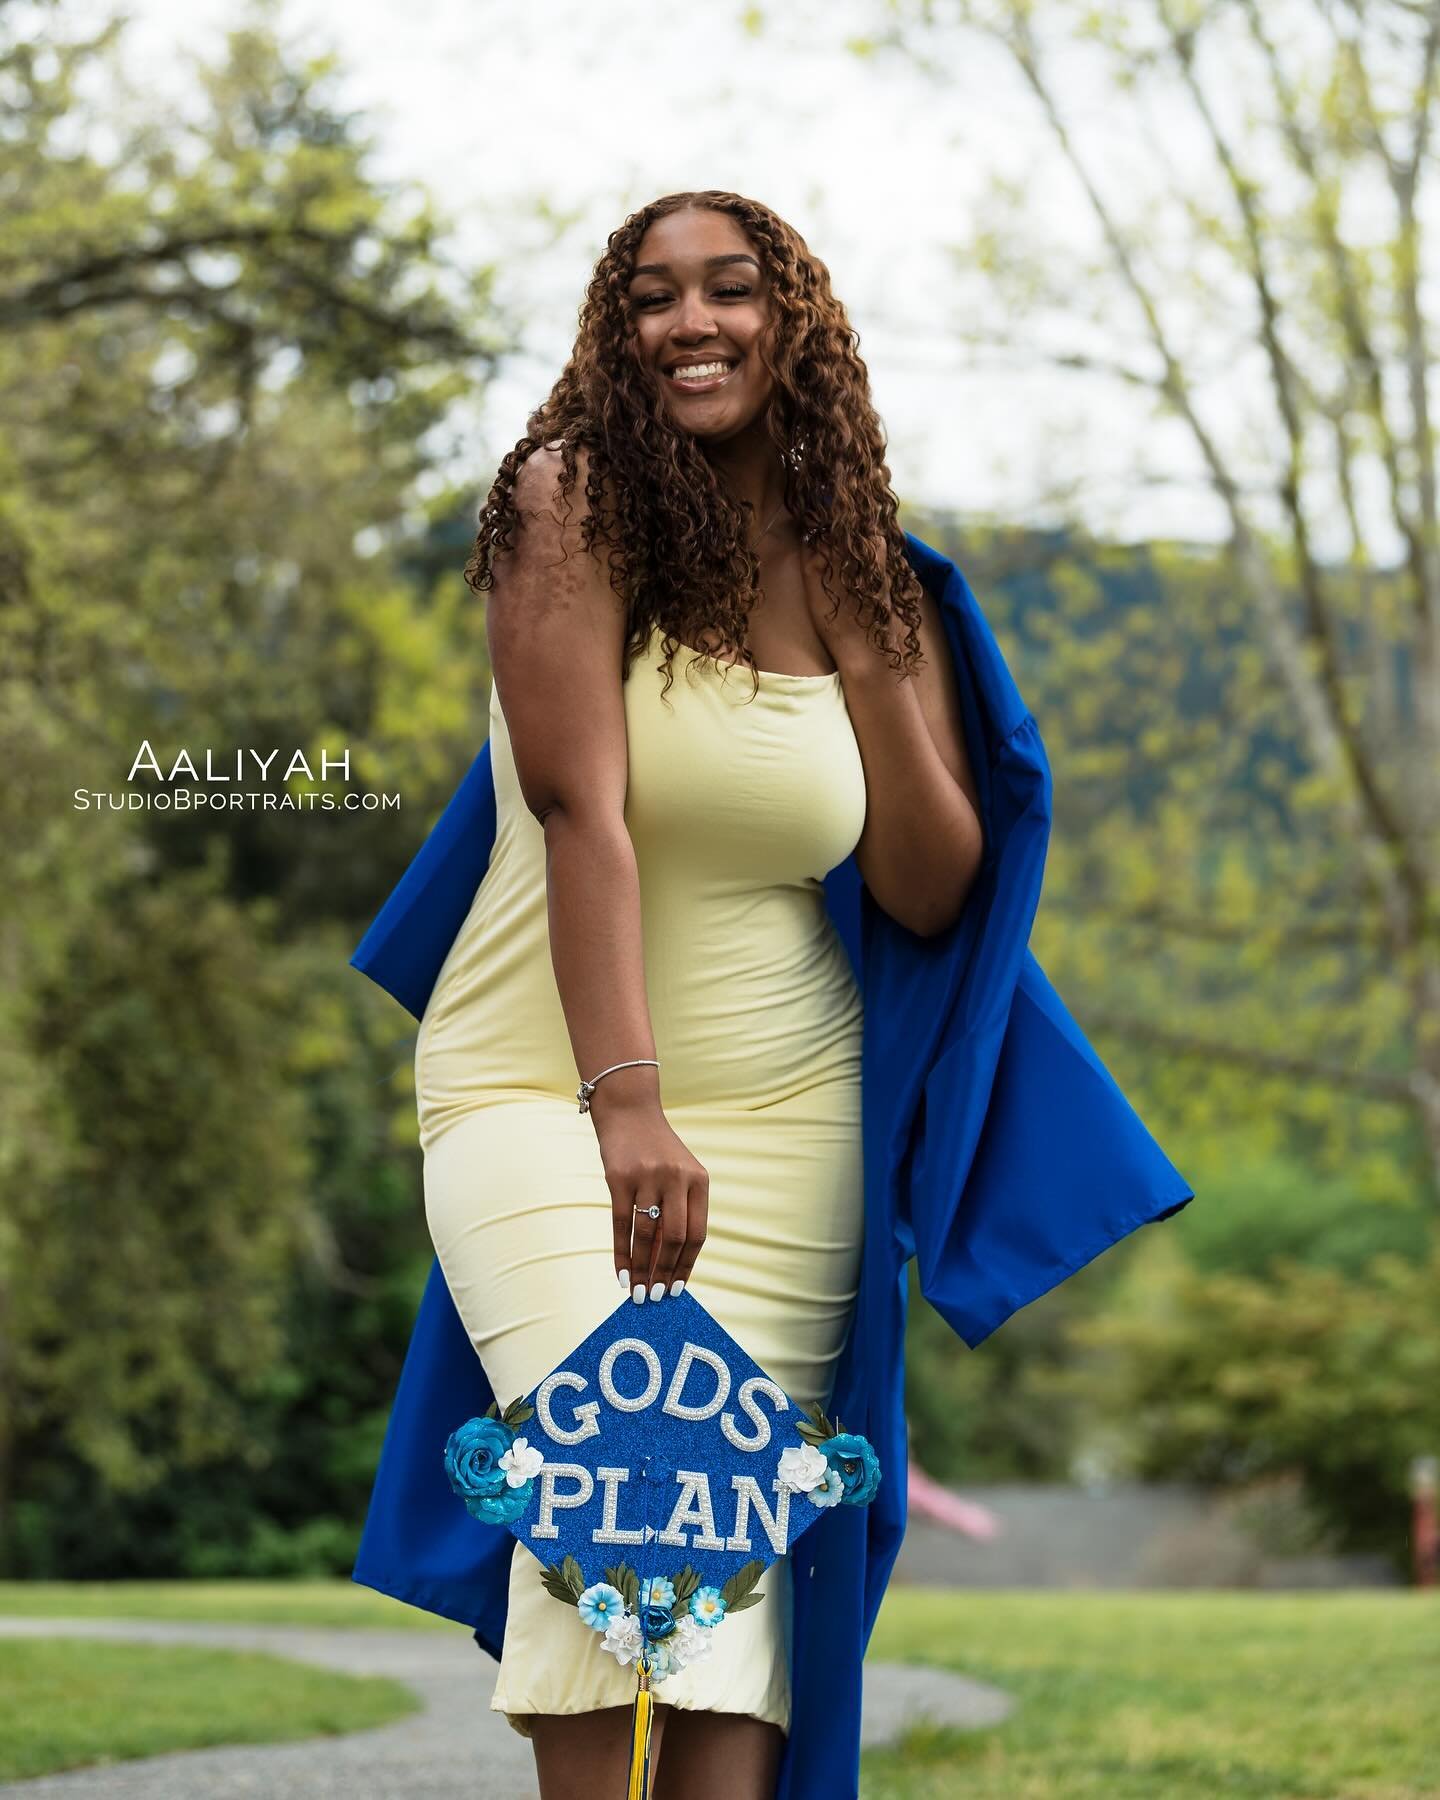 Three cheers to the graduation season! Aaliyah brought so much sweetness + sass to her Cap &amp; Gown session&hellip;we loved getting the opportunity to celebrate with this gorgeous gal!

#studiobportraits #studiobseniors #capandgown #studiobgirls #i